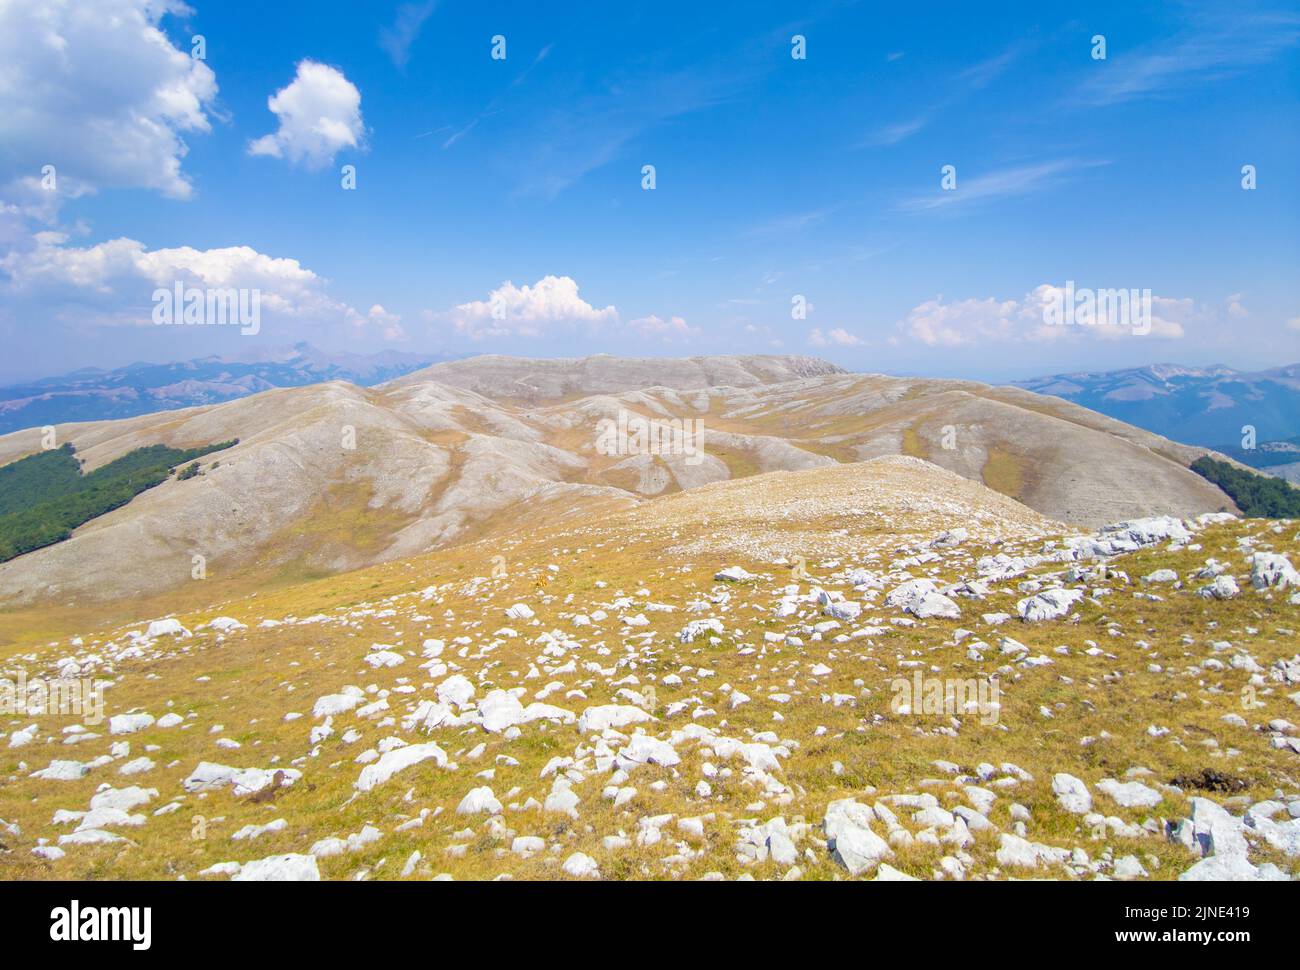 Monte Nuria (Italy) - The Nuria and Nurietta mountains are two peaks almost 1900 meters within the Apennine chain of the Monti del Cicolano, Rieti Stock Photo